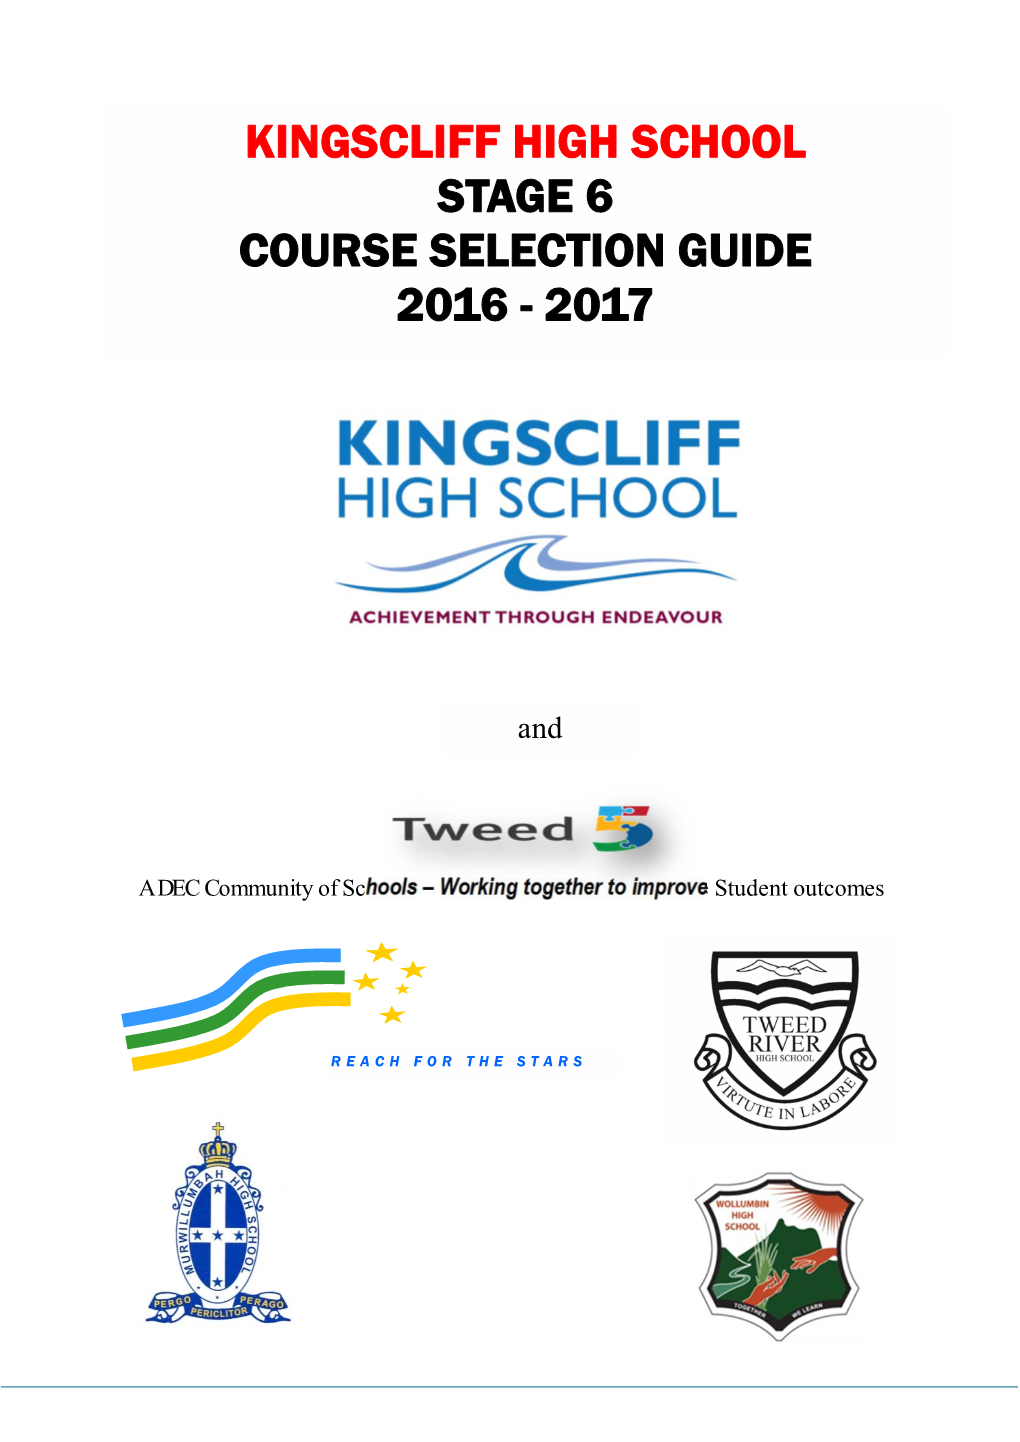 Kingscliff High School Stage 6 Course Selection Guide 2016